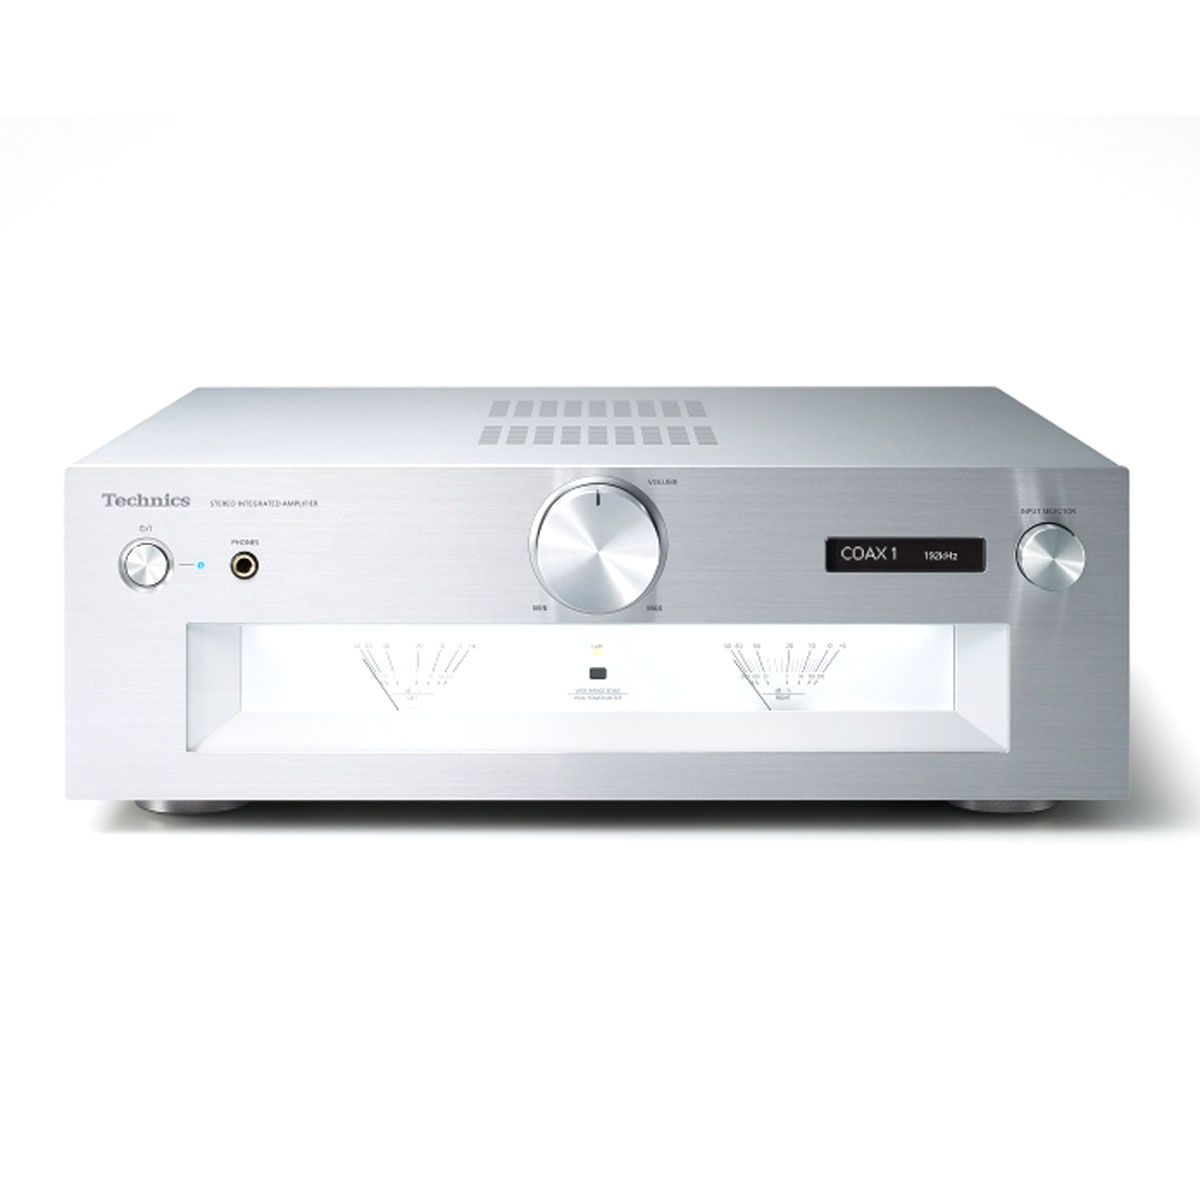 TECHNICS SU-G700M2 GRAND CLASS INTEGRATED AMPLIFIER | VINYL SOUND High Precision Coherent D/A Converter The SL-G700M2 is equipped with the High Precision Coherent D/A Converter, which is the result of the accumulation of these technologies, converts digital values to analogue signals with the utmost precision and outputs them to an amplifier.